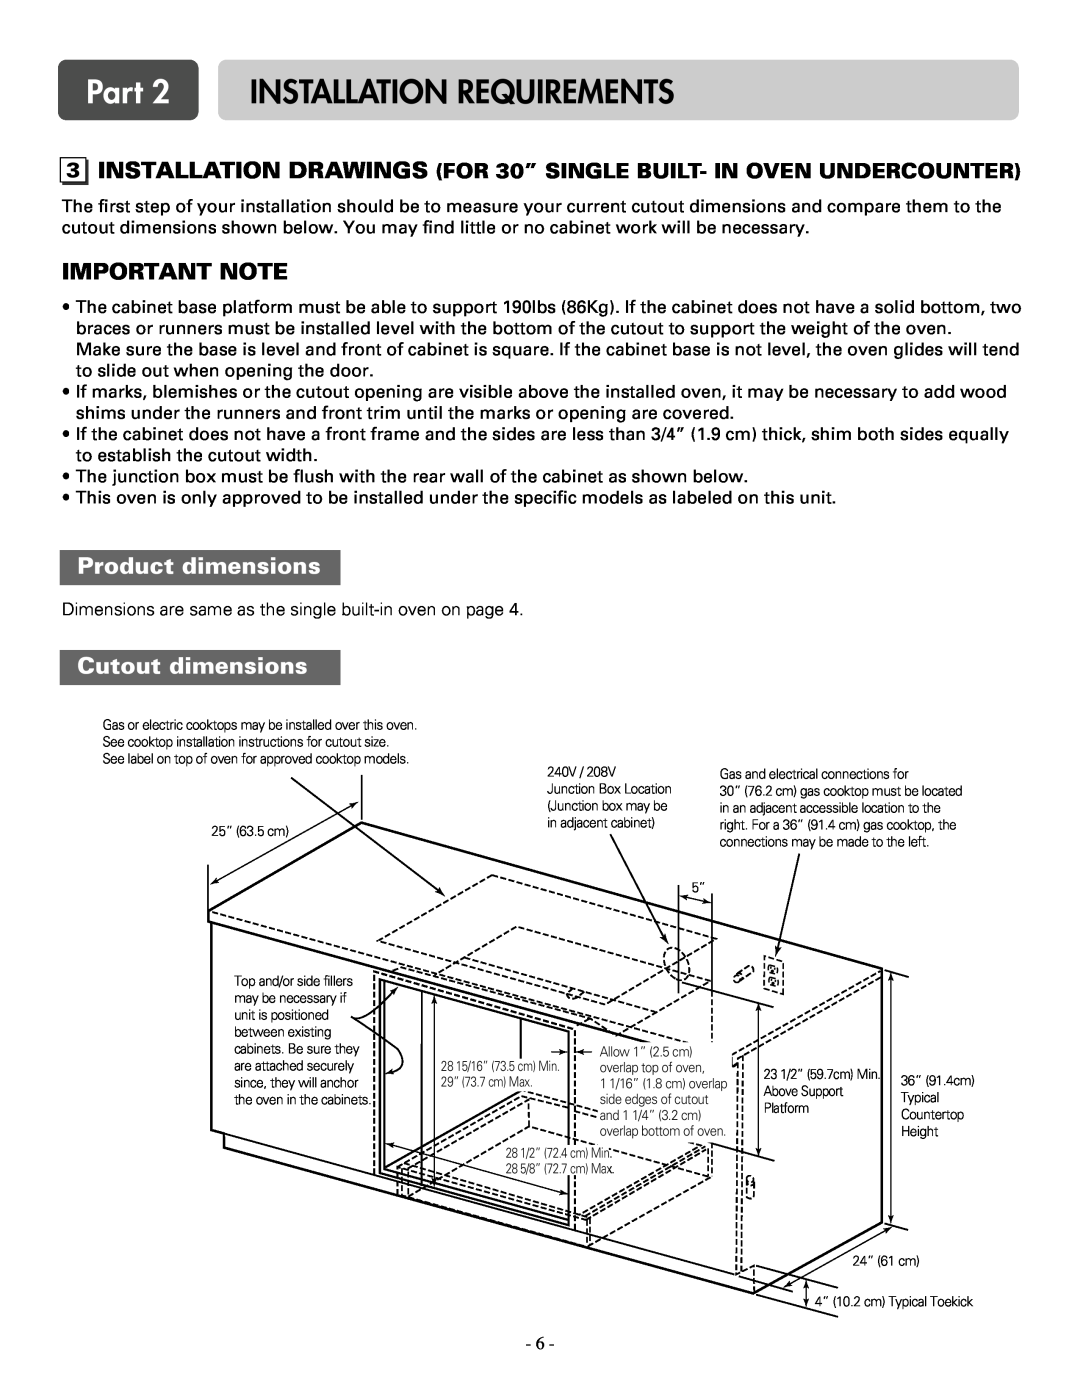 LG Electronics LWS3010ST Part 2 INSTALLATION REQUIREMENTS, Important Note, Product dimensions, Cutout dimensions 